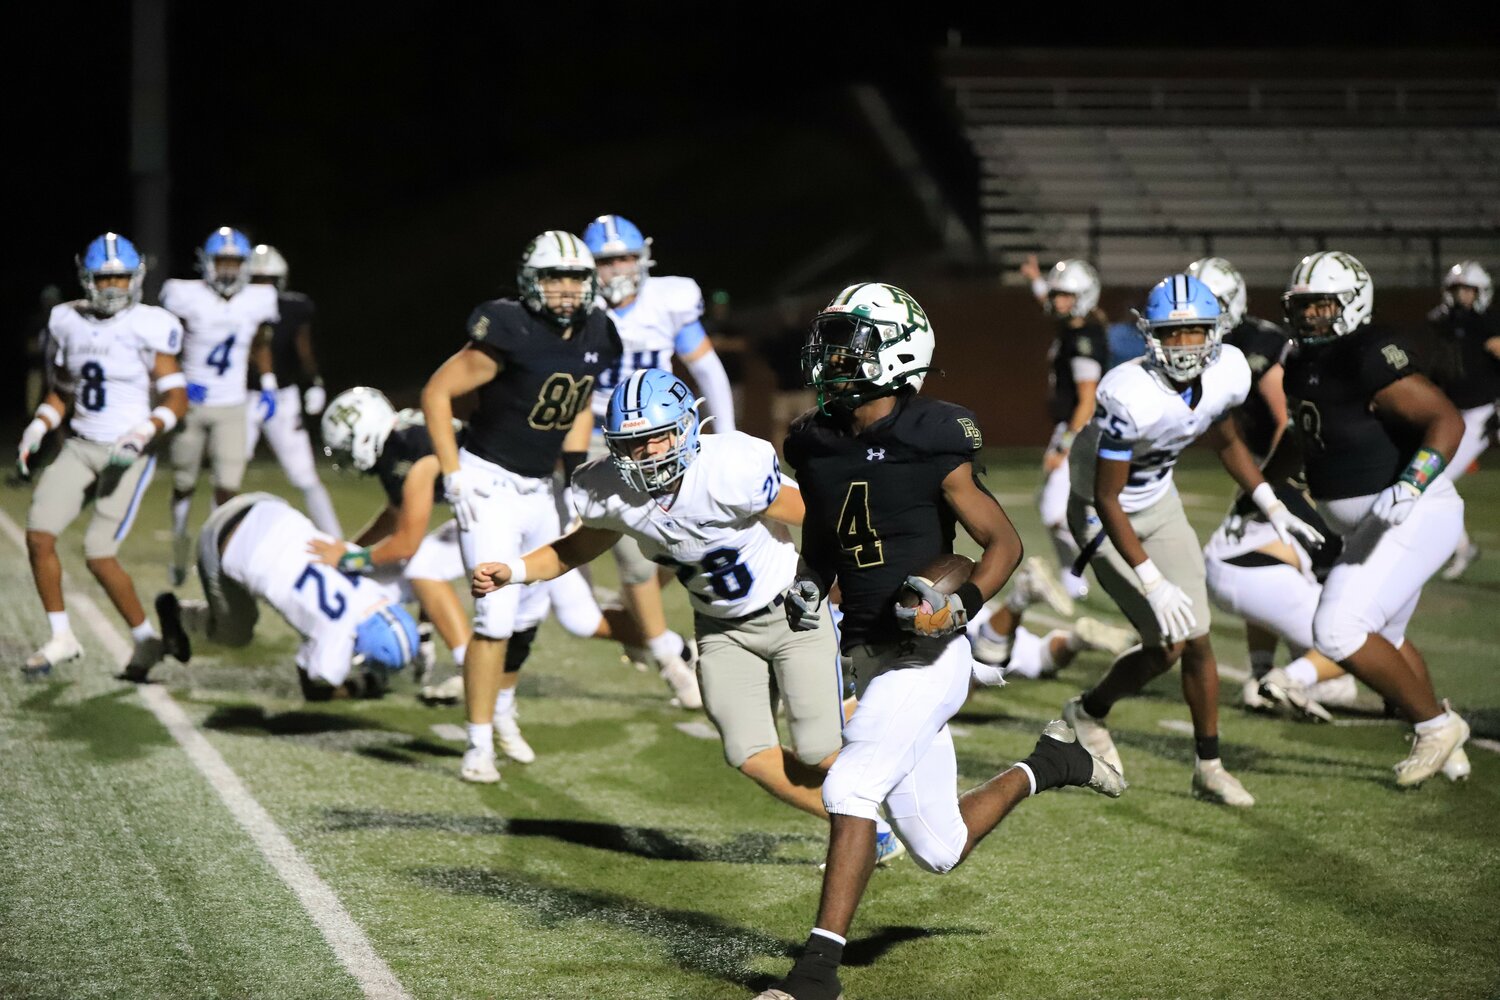 River Bluff running back Toriaun Leaphart rushes in a touchdown to cut the Dorman lead to 21-16 during the third quarter.